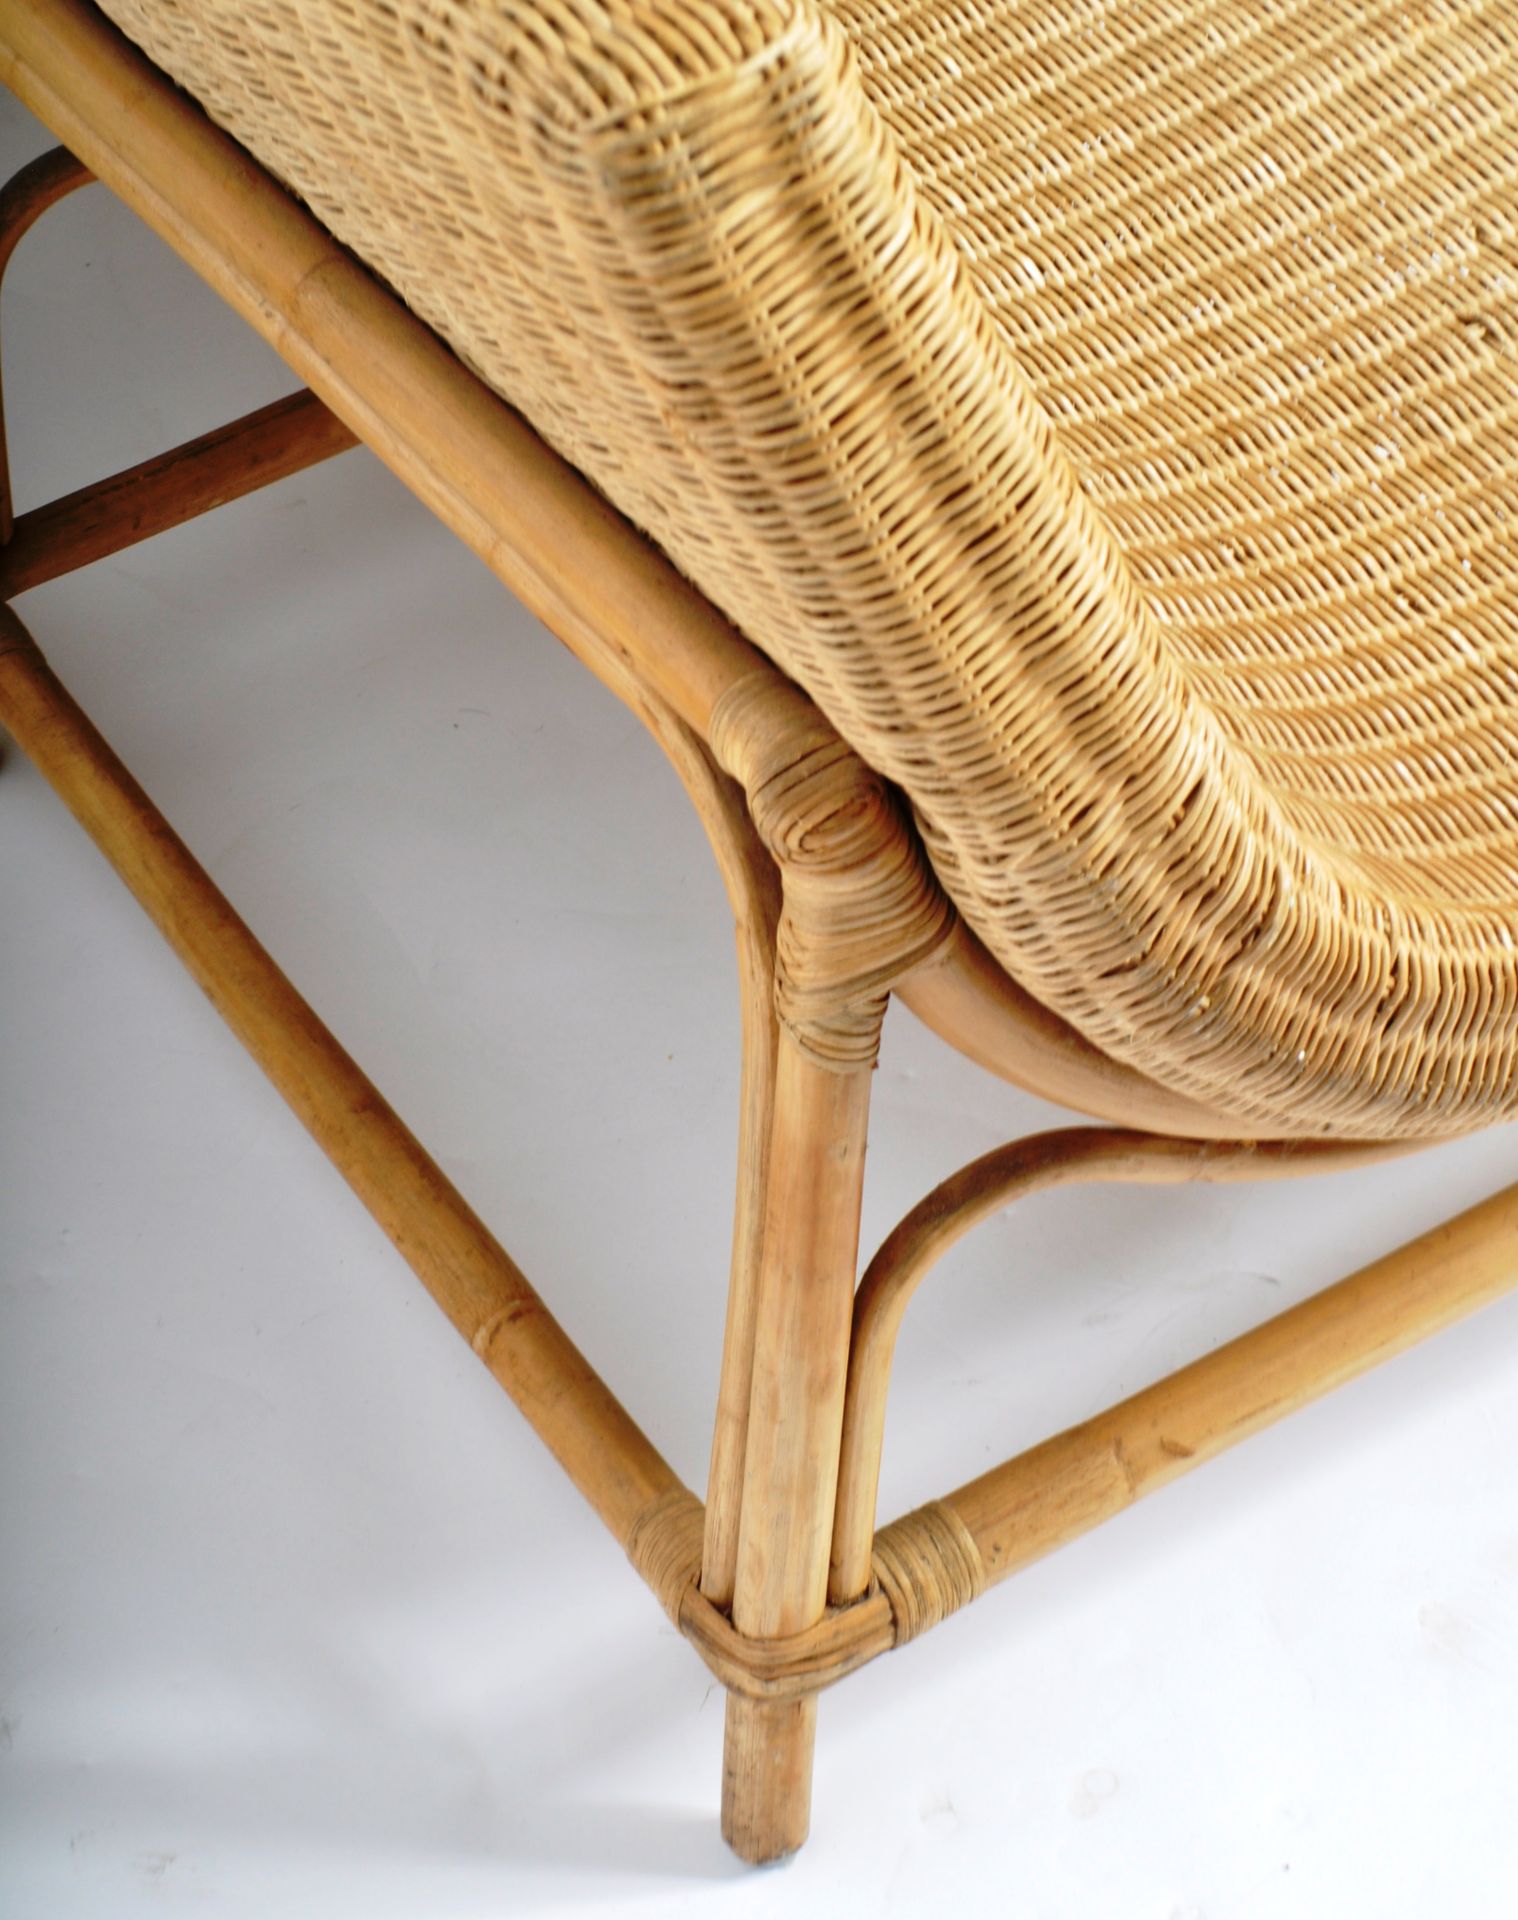 RETRO WICKER / CANE AND BAMBOO BENCH / LOUNGE SOFA CHAIR - Image 6 of 7